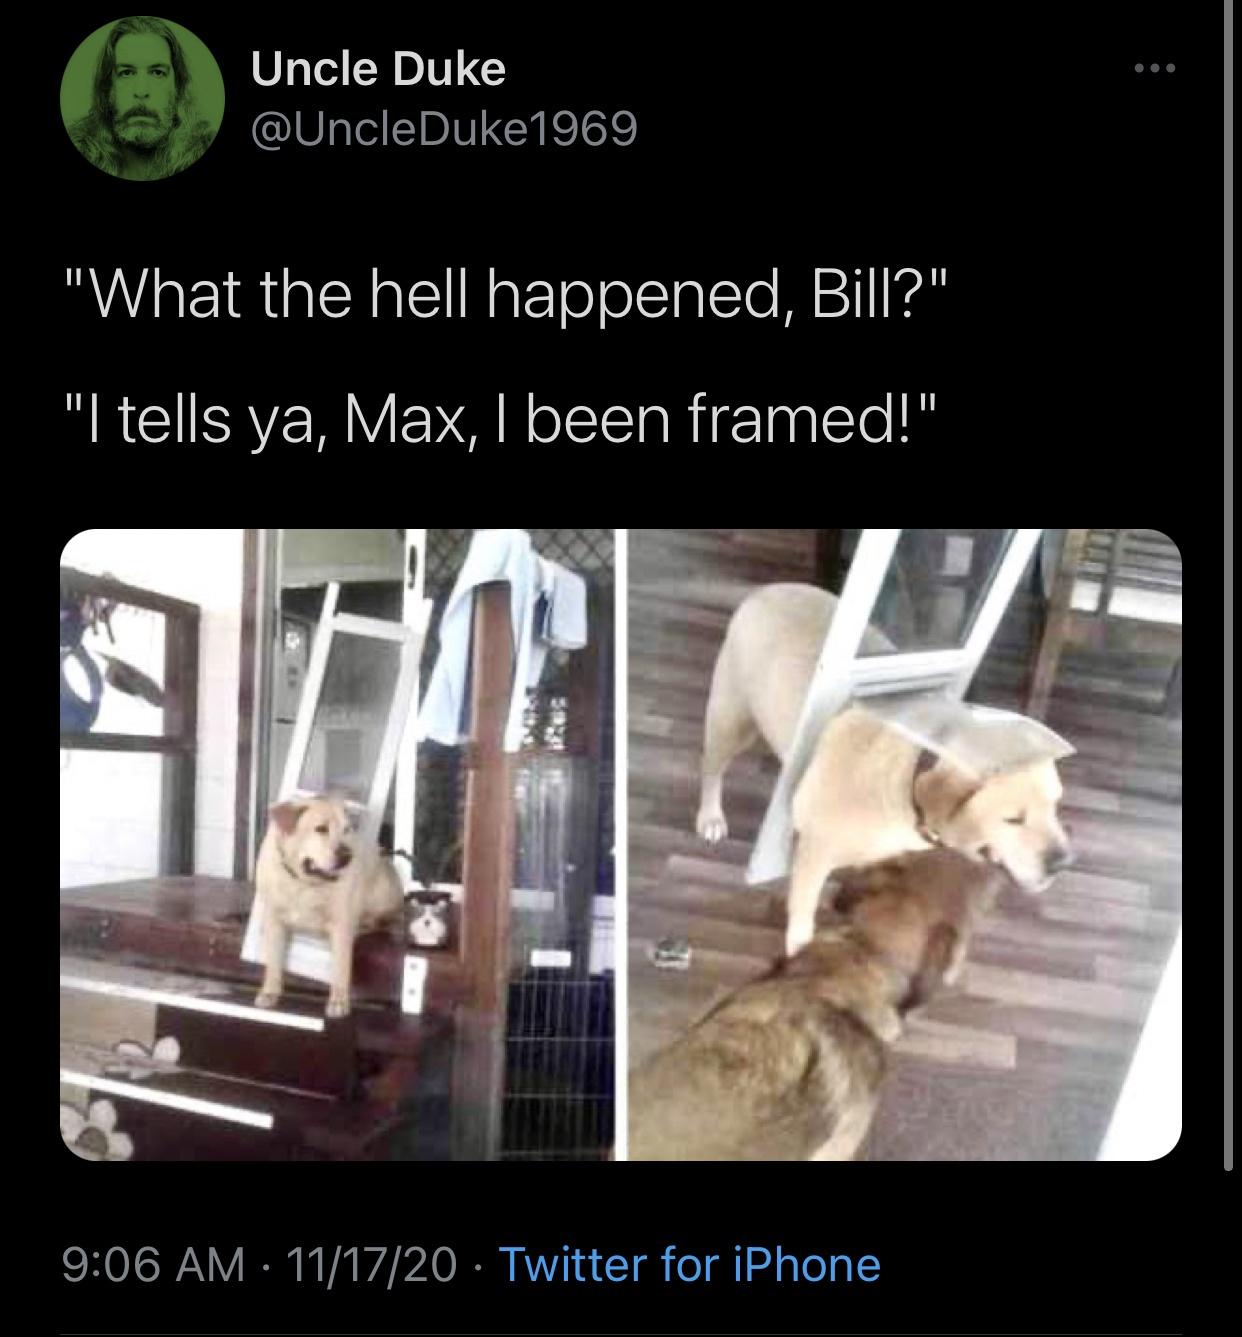 photo caption - Uncle Duke "What the hell happened, Bill?" "I tells ya, Max, I been framed!" 111720 Twitter for iPhone